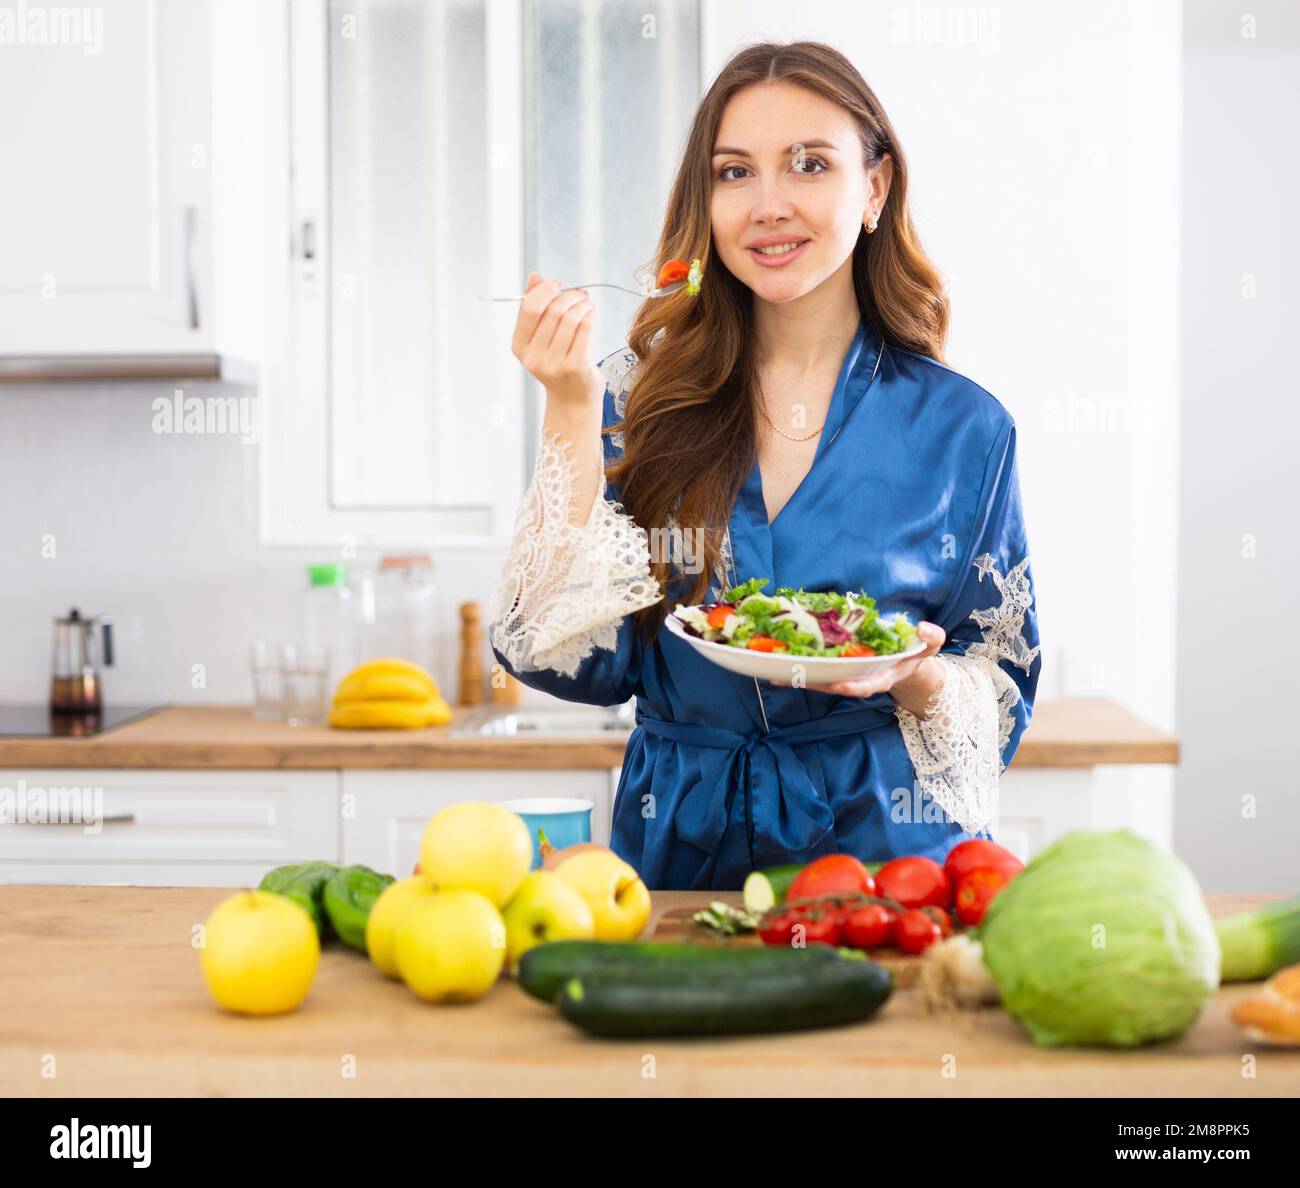 Positive housewife eating homemade salad in kitchen Stock Photo